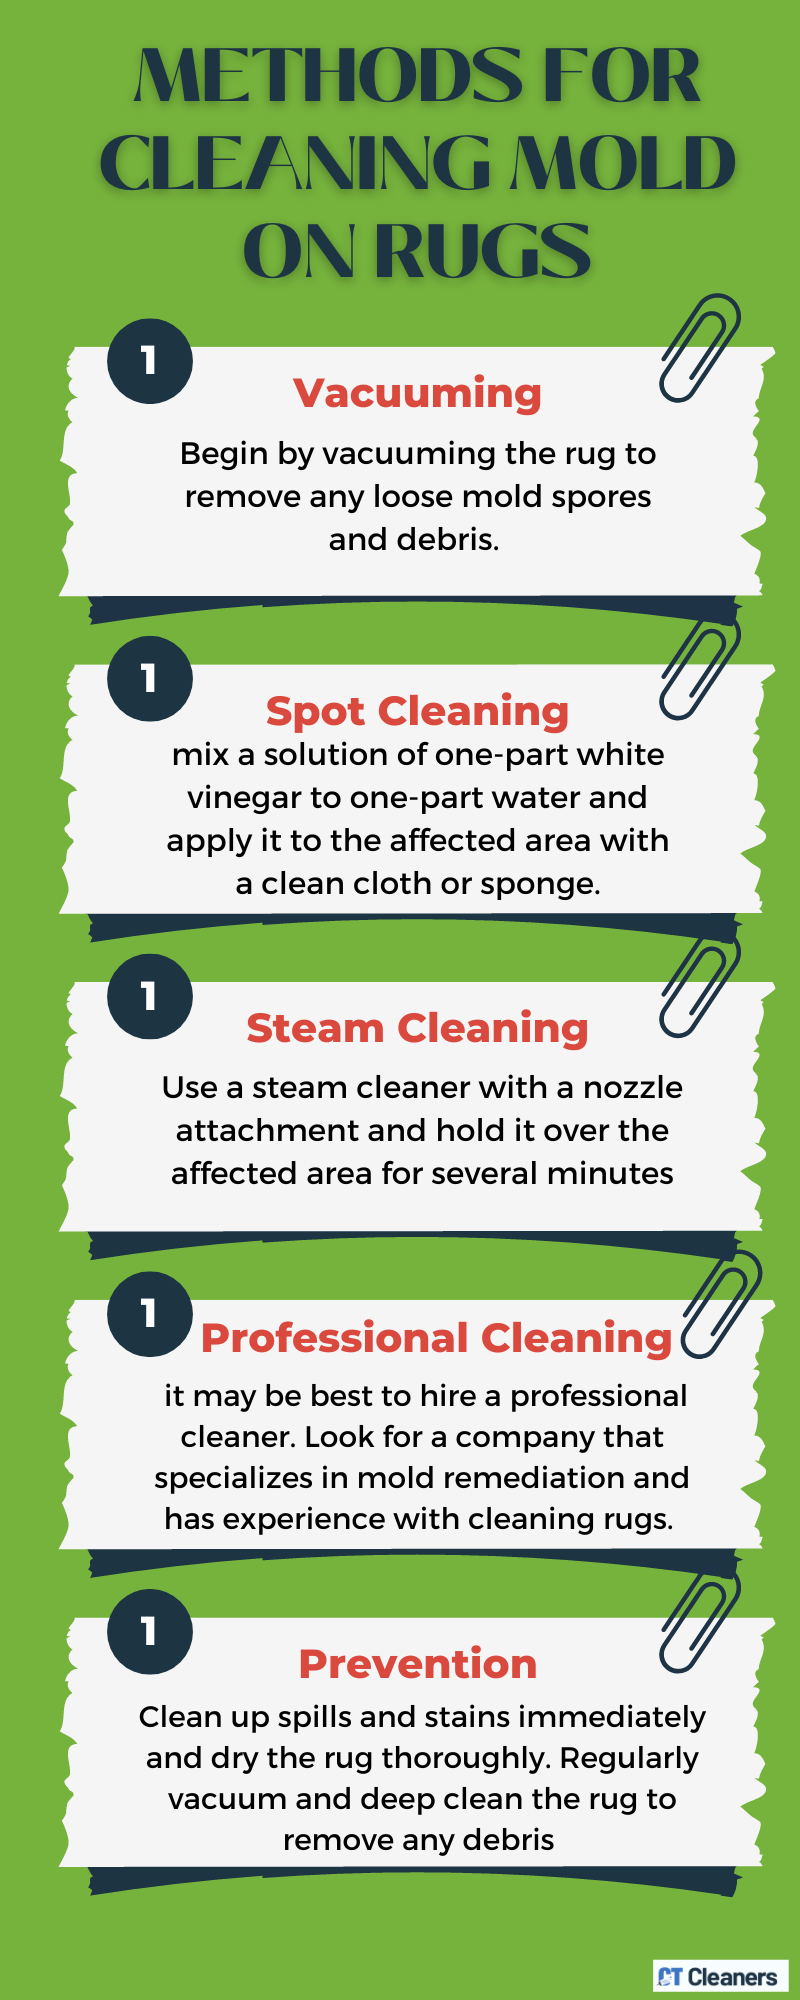 Methods for Cleaning Mold on Rugs